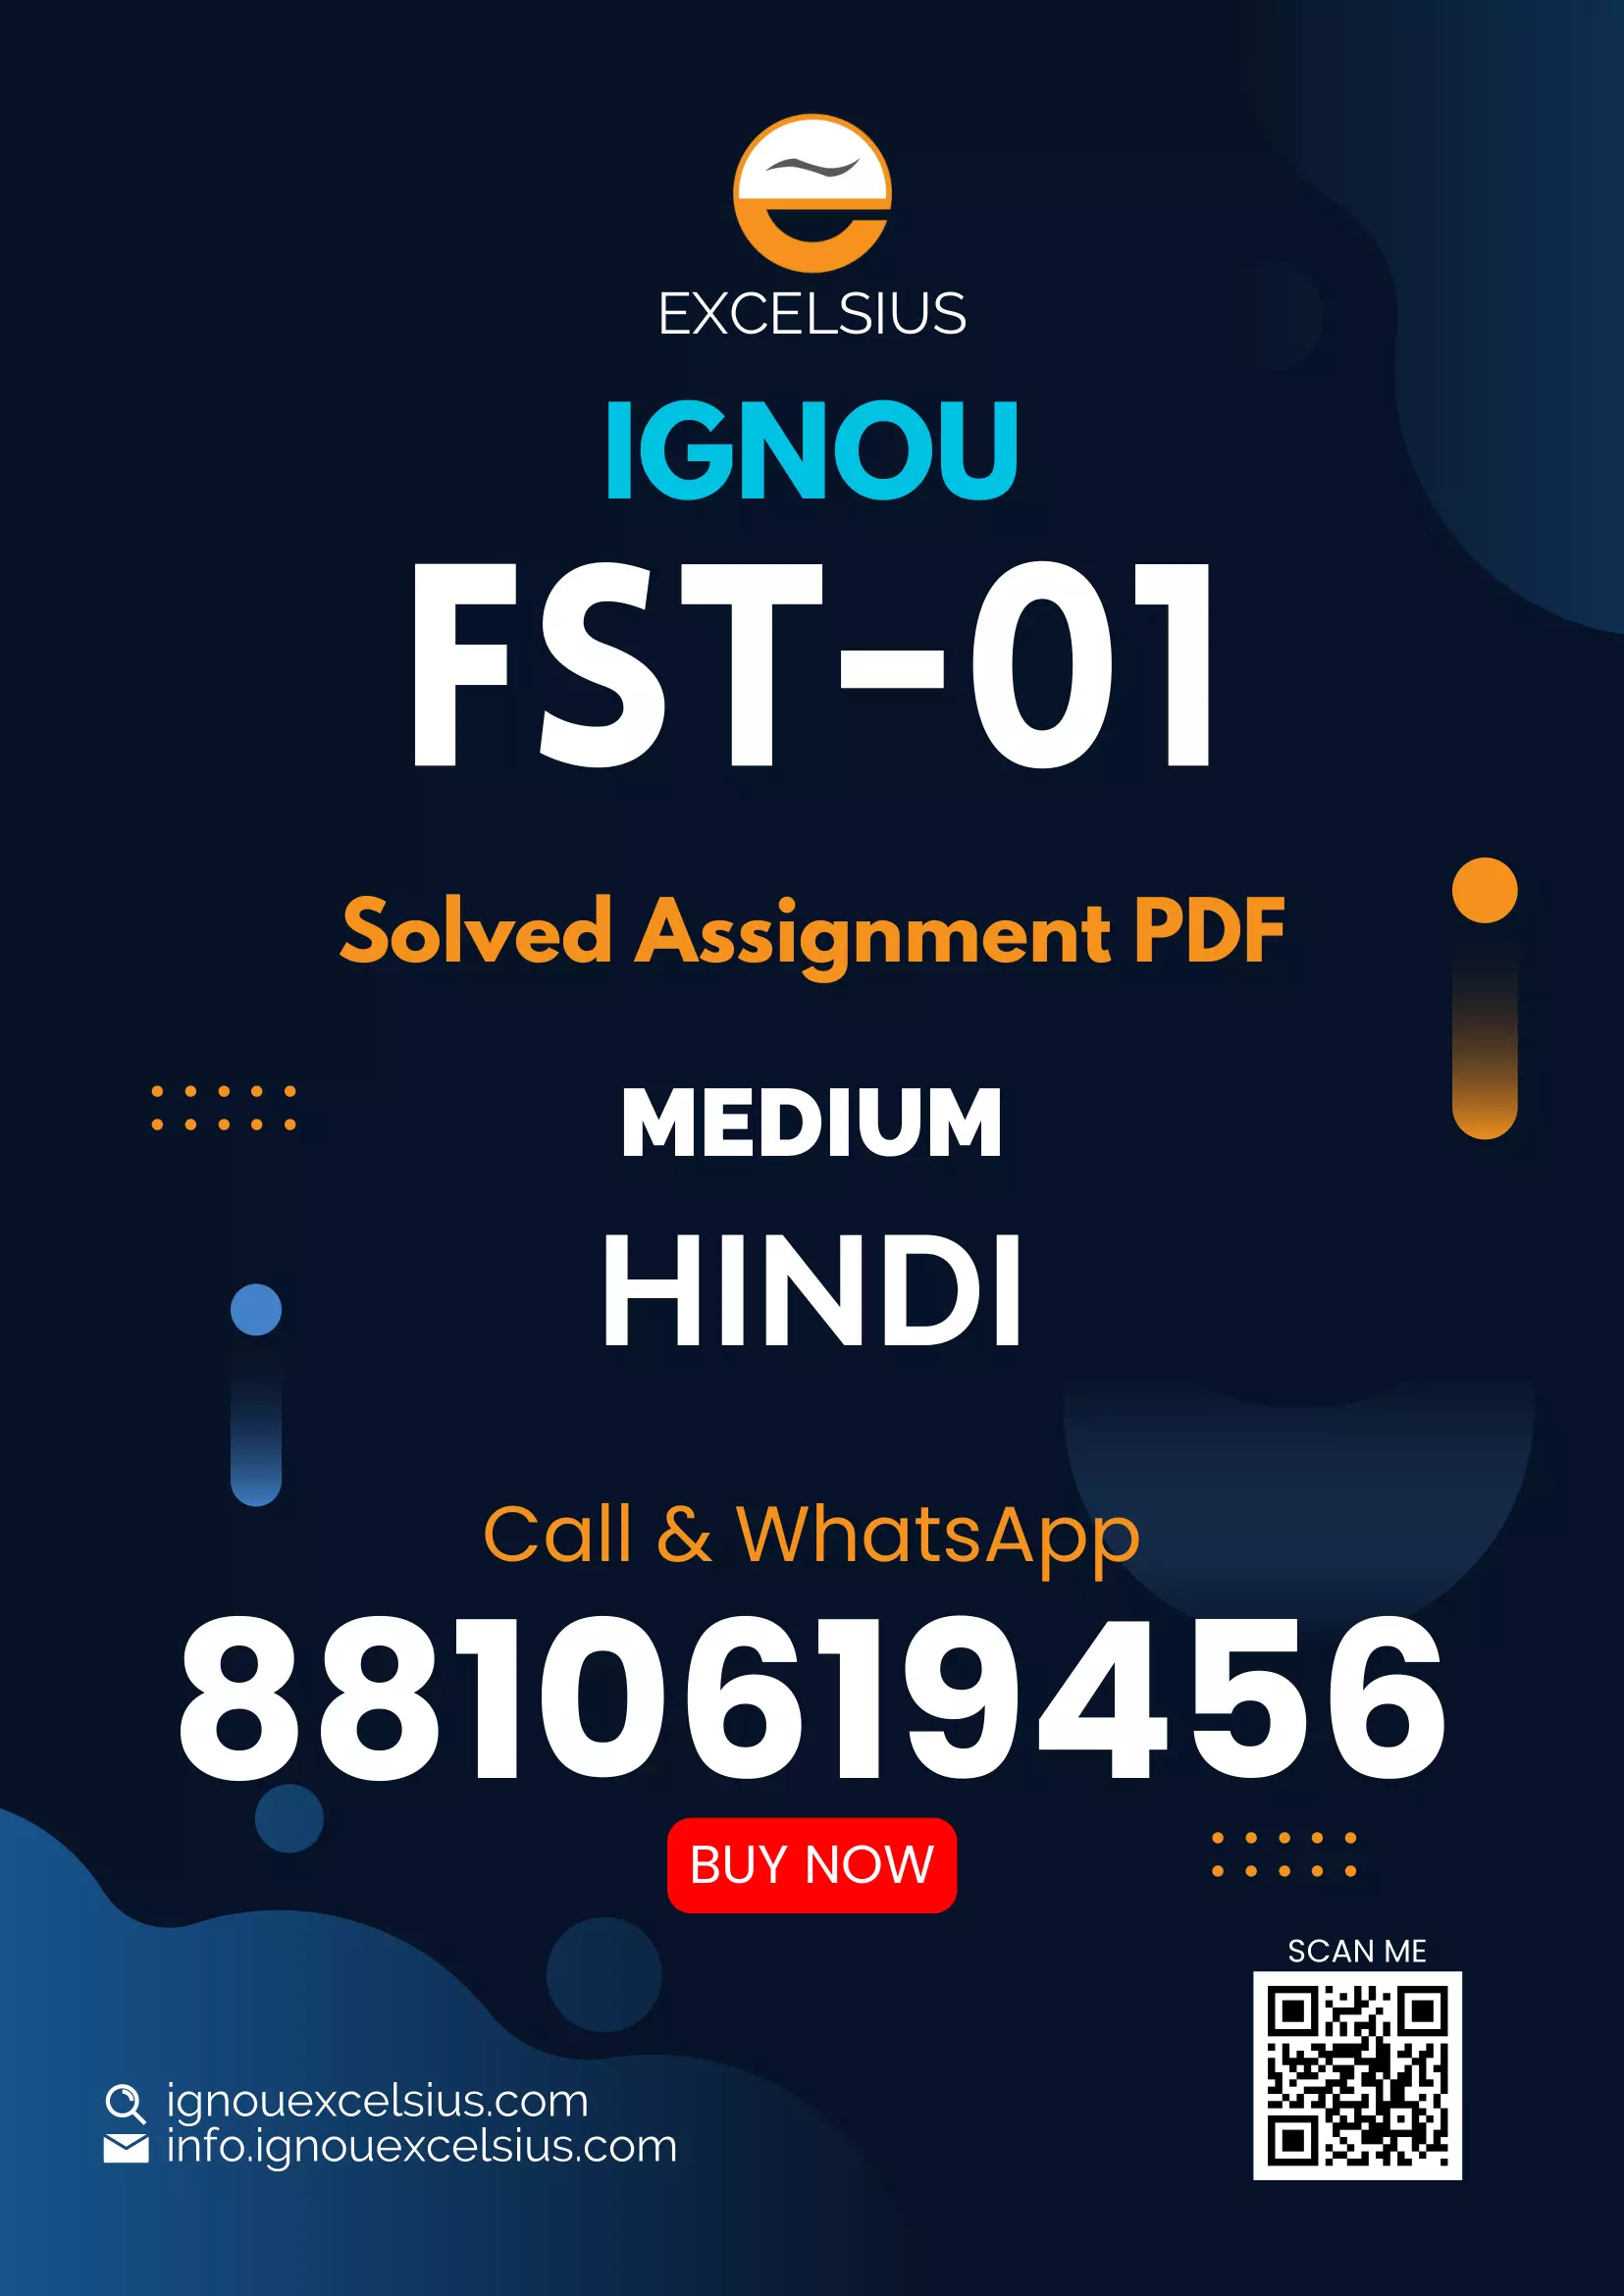 IGNOU FST-01 - Foundation Course in Science and Technology, Latest Solved Assignment-January 2023 - December 2023